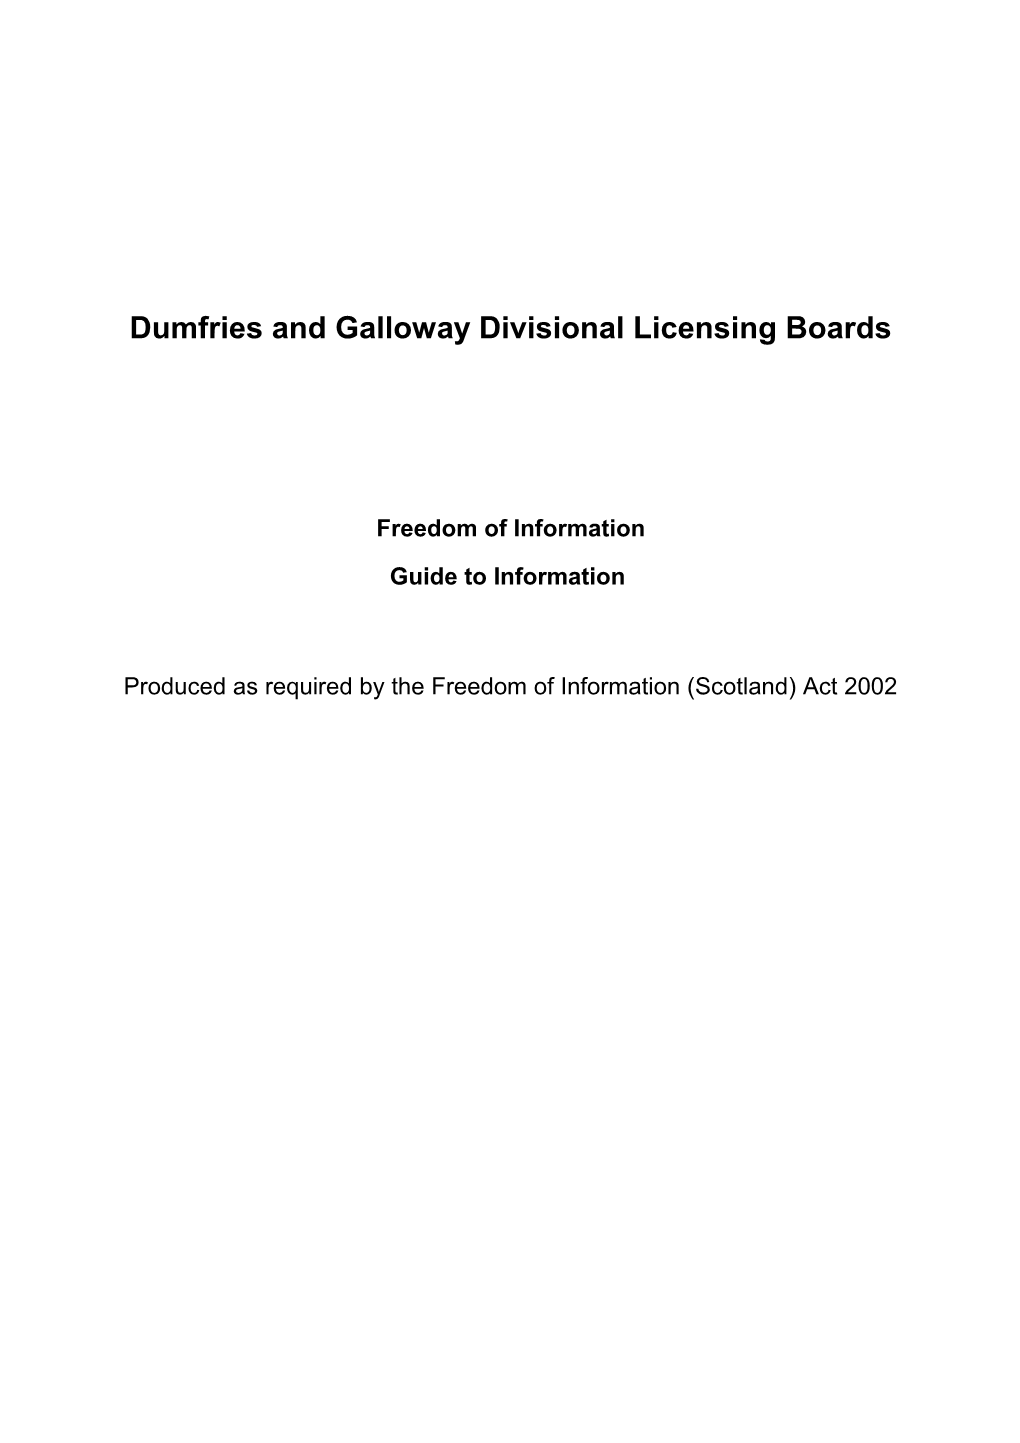 Dumfries and Galloway Divisional Licensing Boards